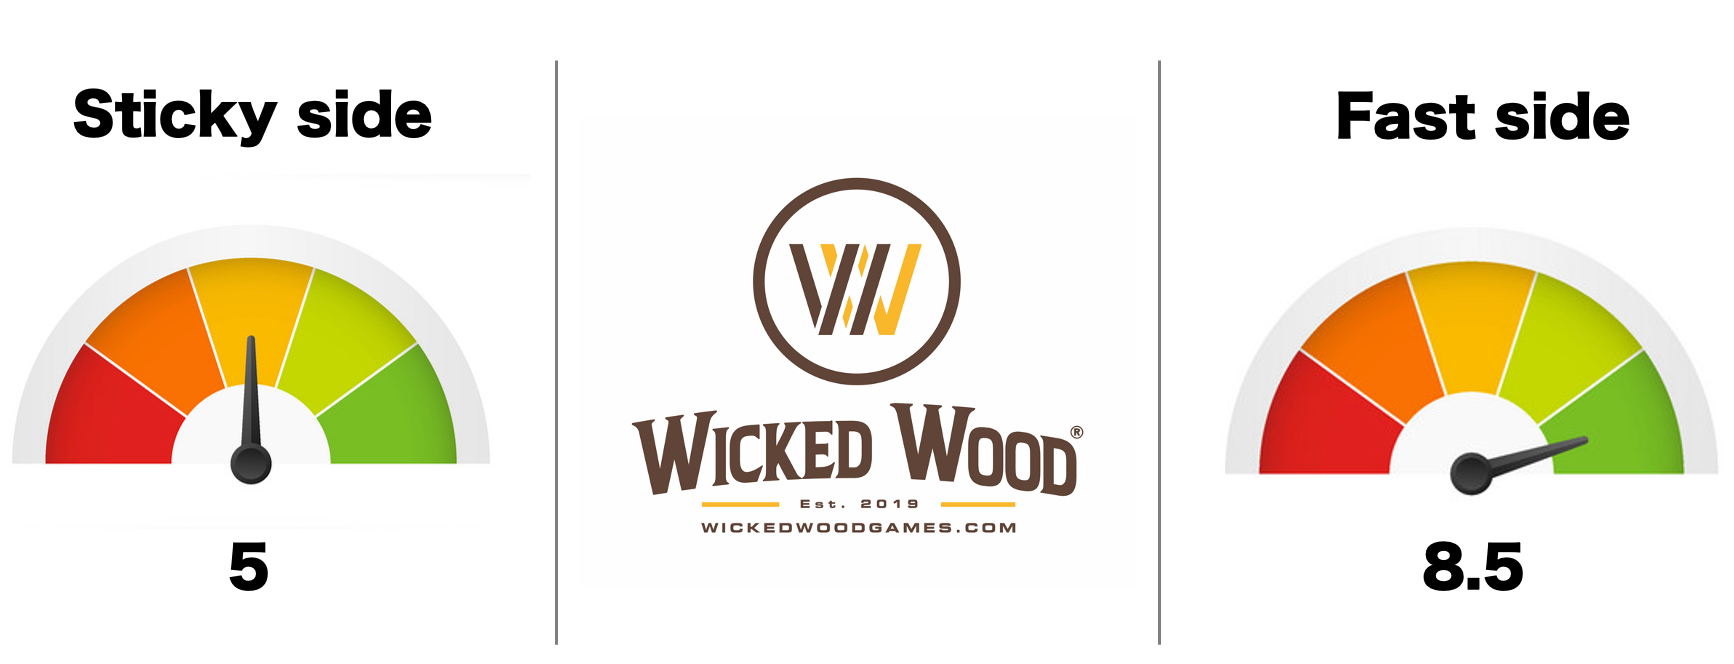 Reynolds Victory - 1x4 Cornhole Bags - Wicked Wood Games